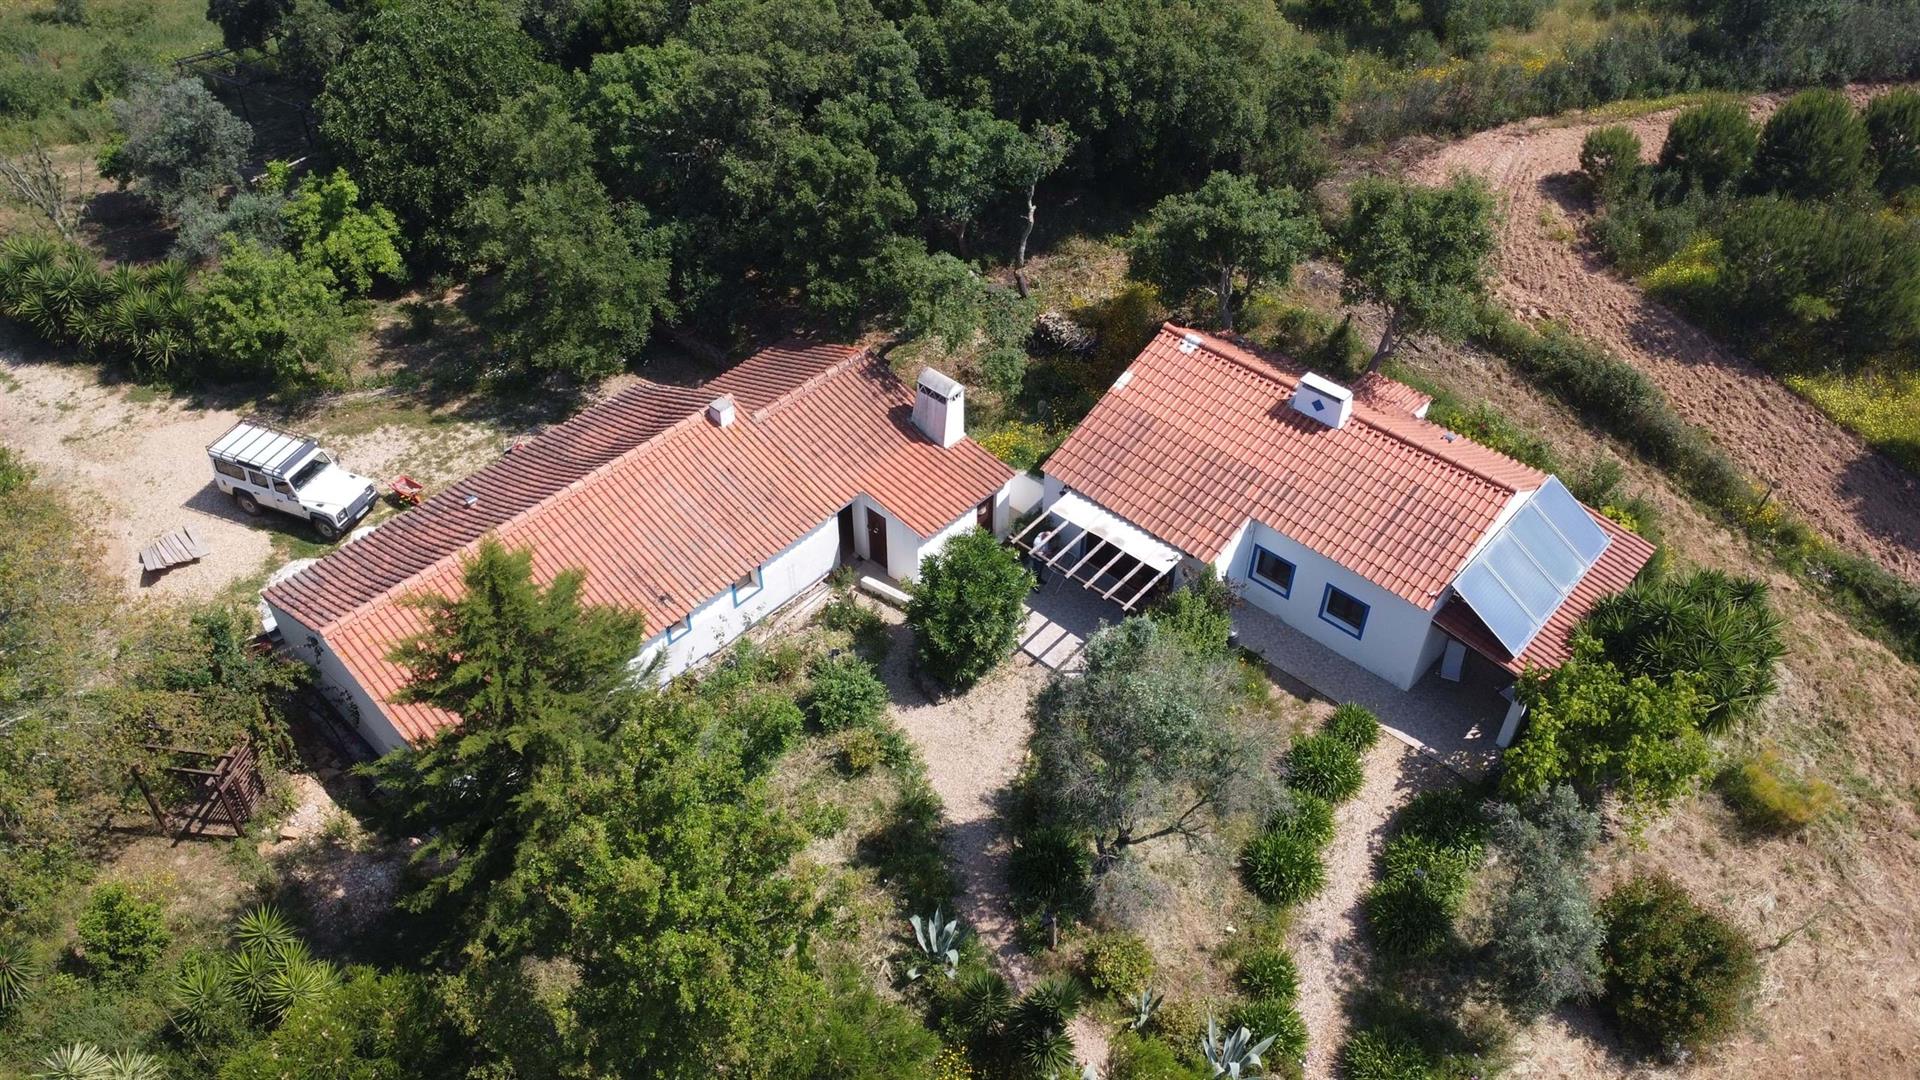 Unique Rural Tourism Property with 1,8 Hectares and Pool - Cercal - Alentejo